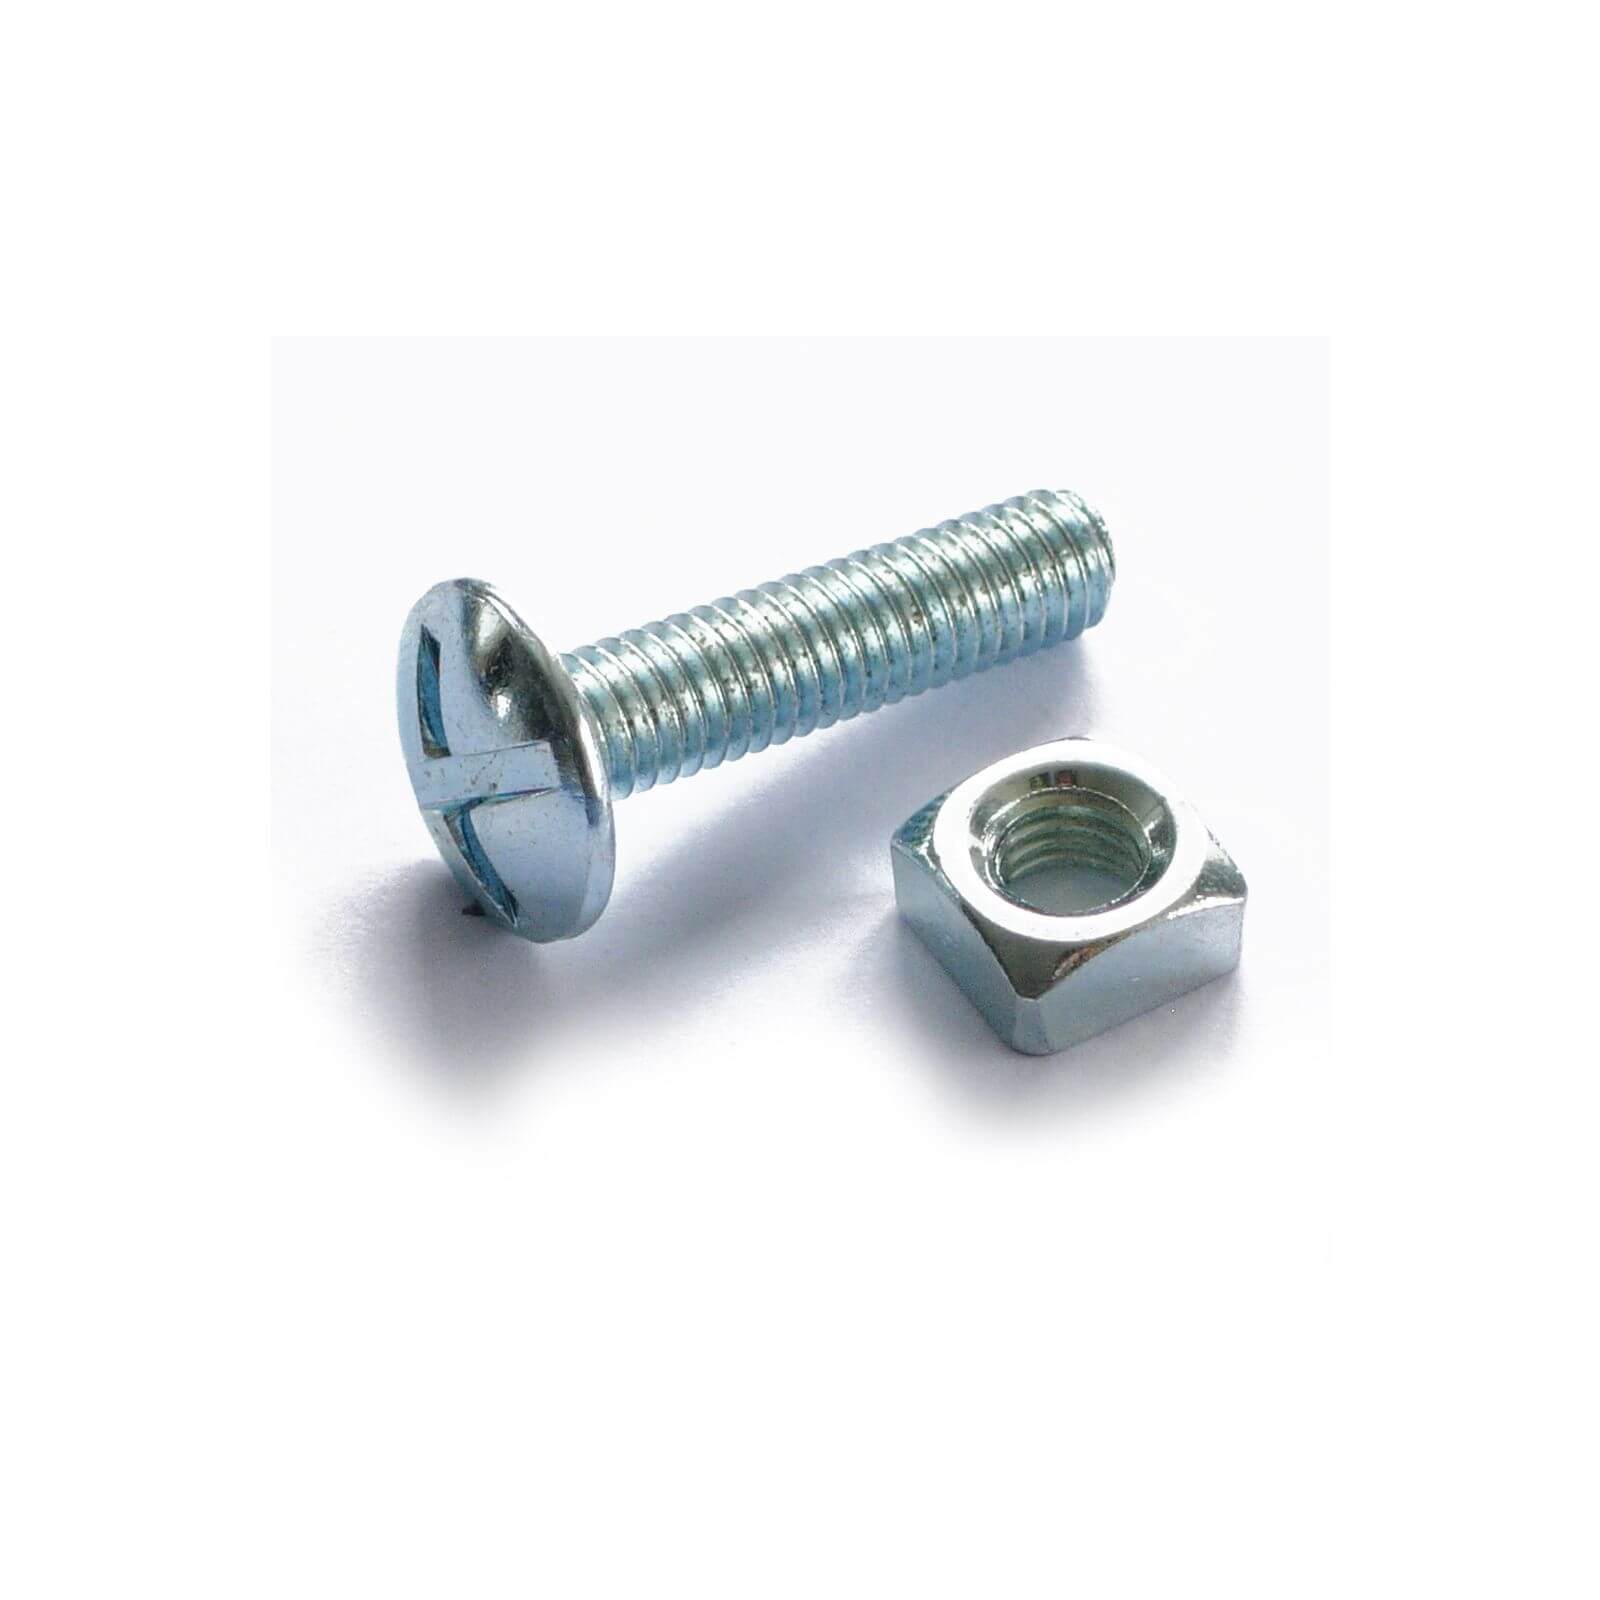 Roofing Bolt - Bright Zinc Plated - M6 12mm - 10 Pack